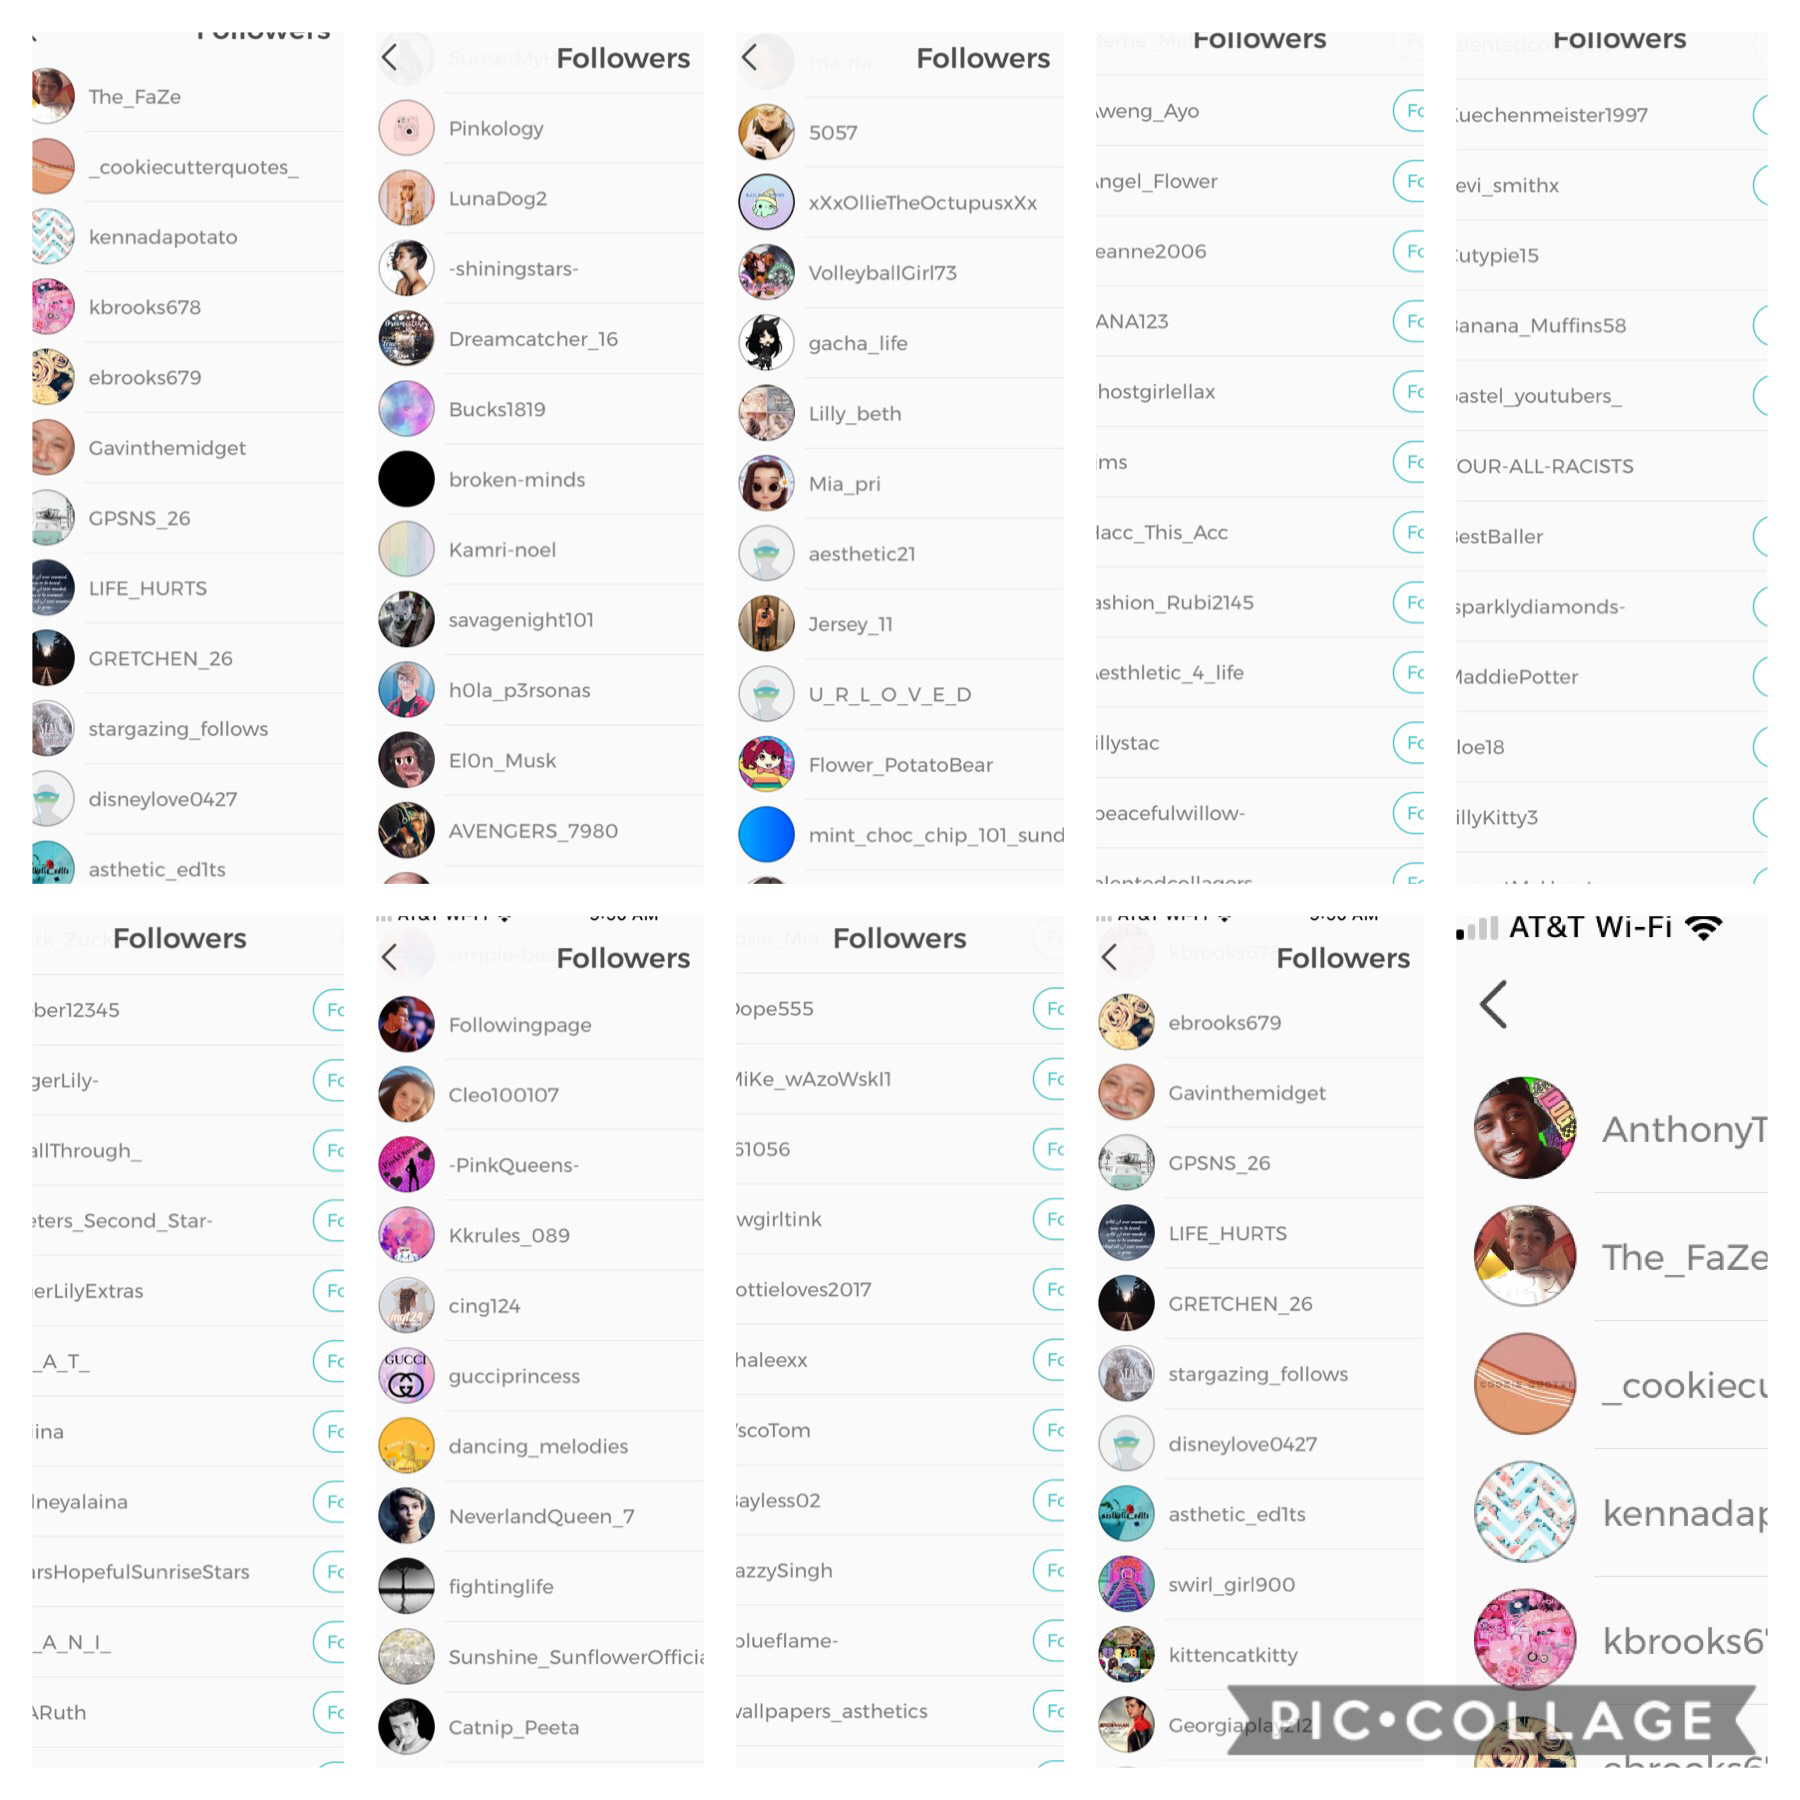 SHOUTOUT TO ALL THESE PEOPLE FOR 100 FOLLOWERS!!!!